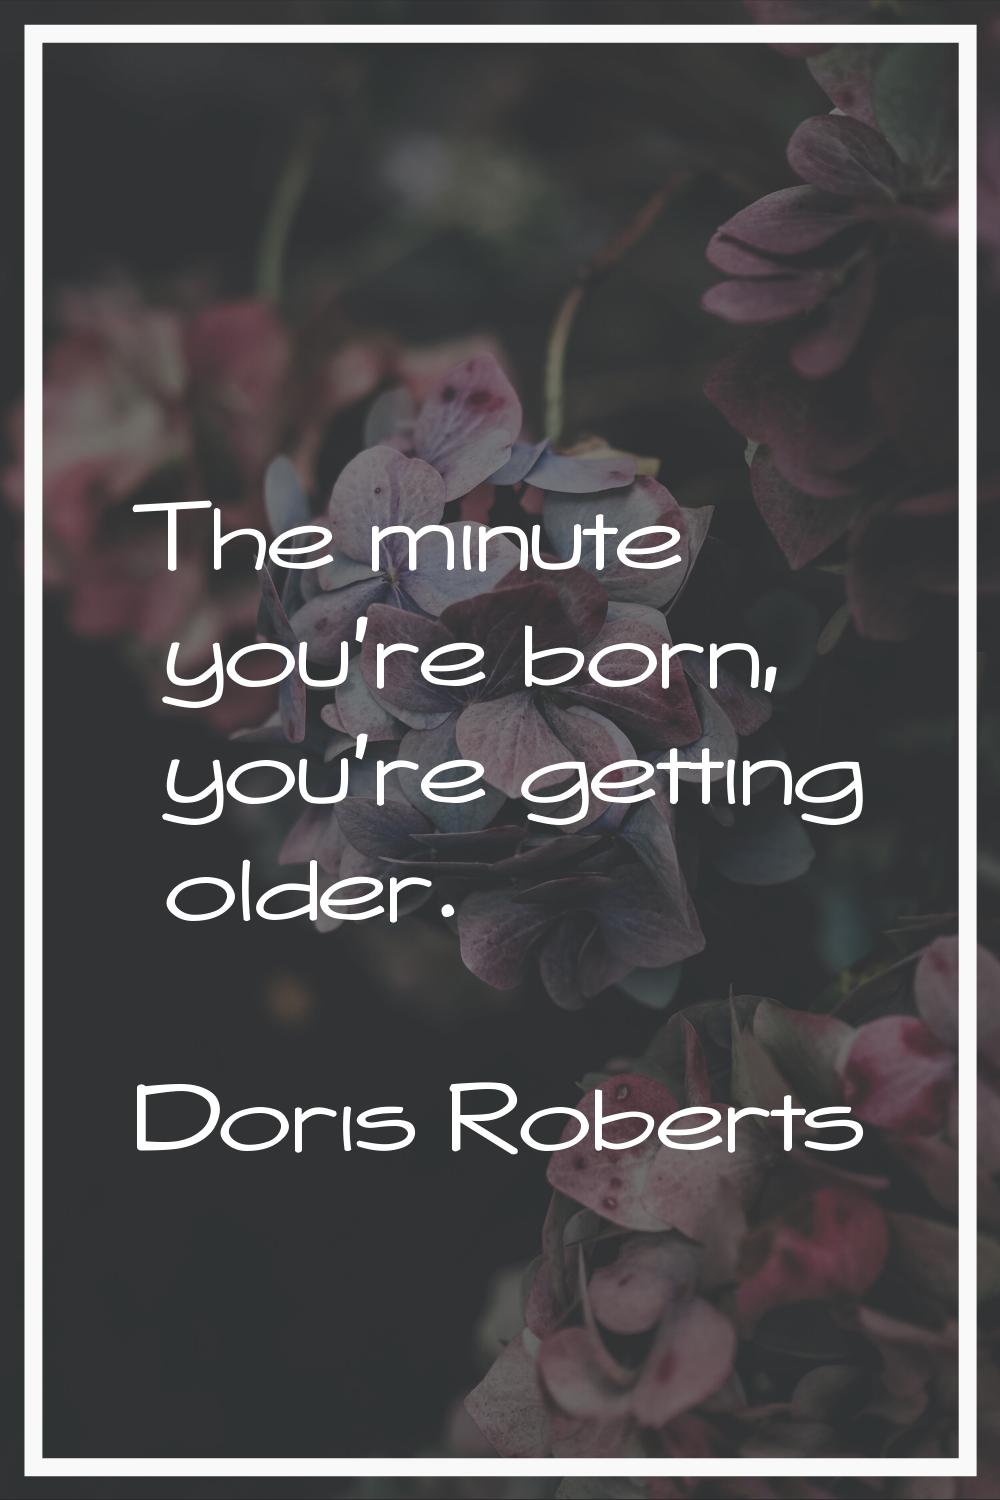 The minute you're born, you're getting older.